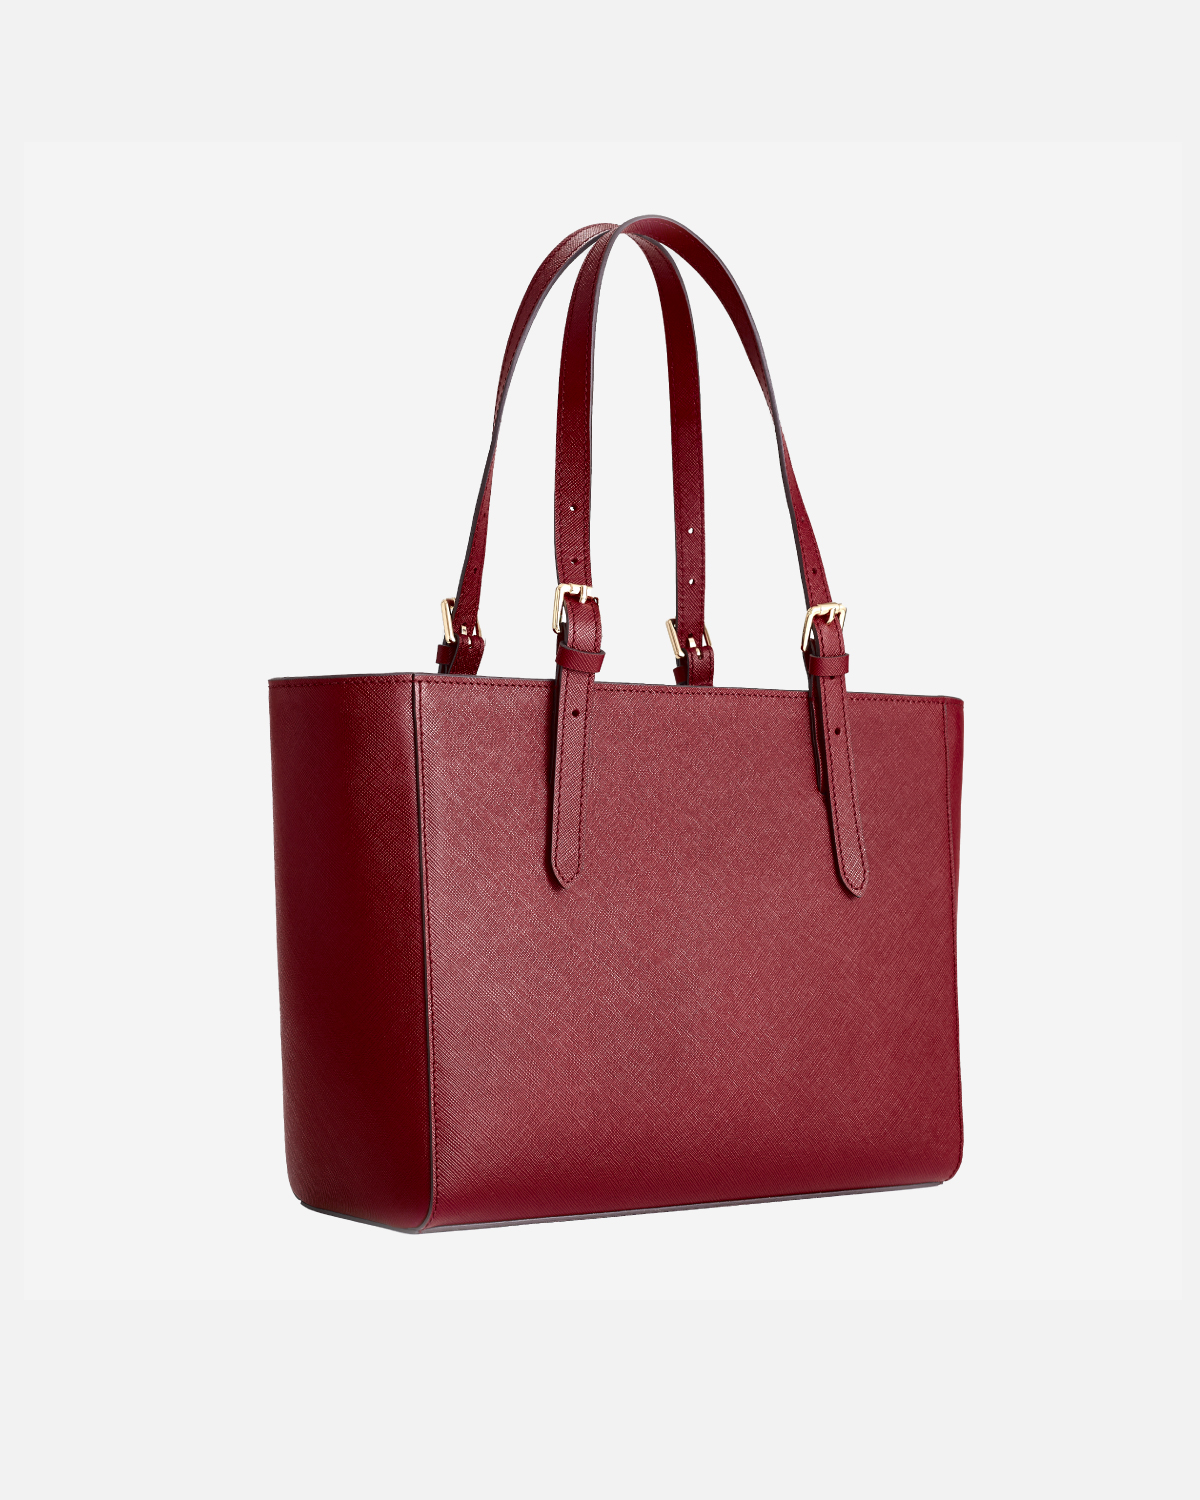 VERA The First Bag in Burgundy